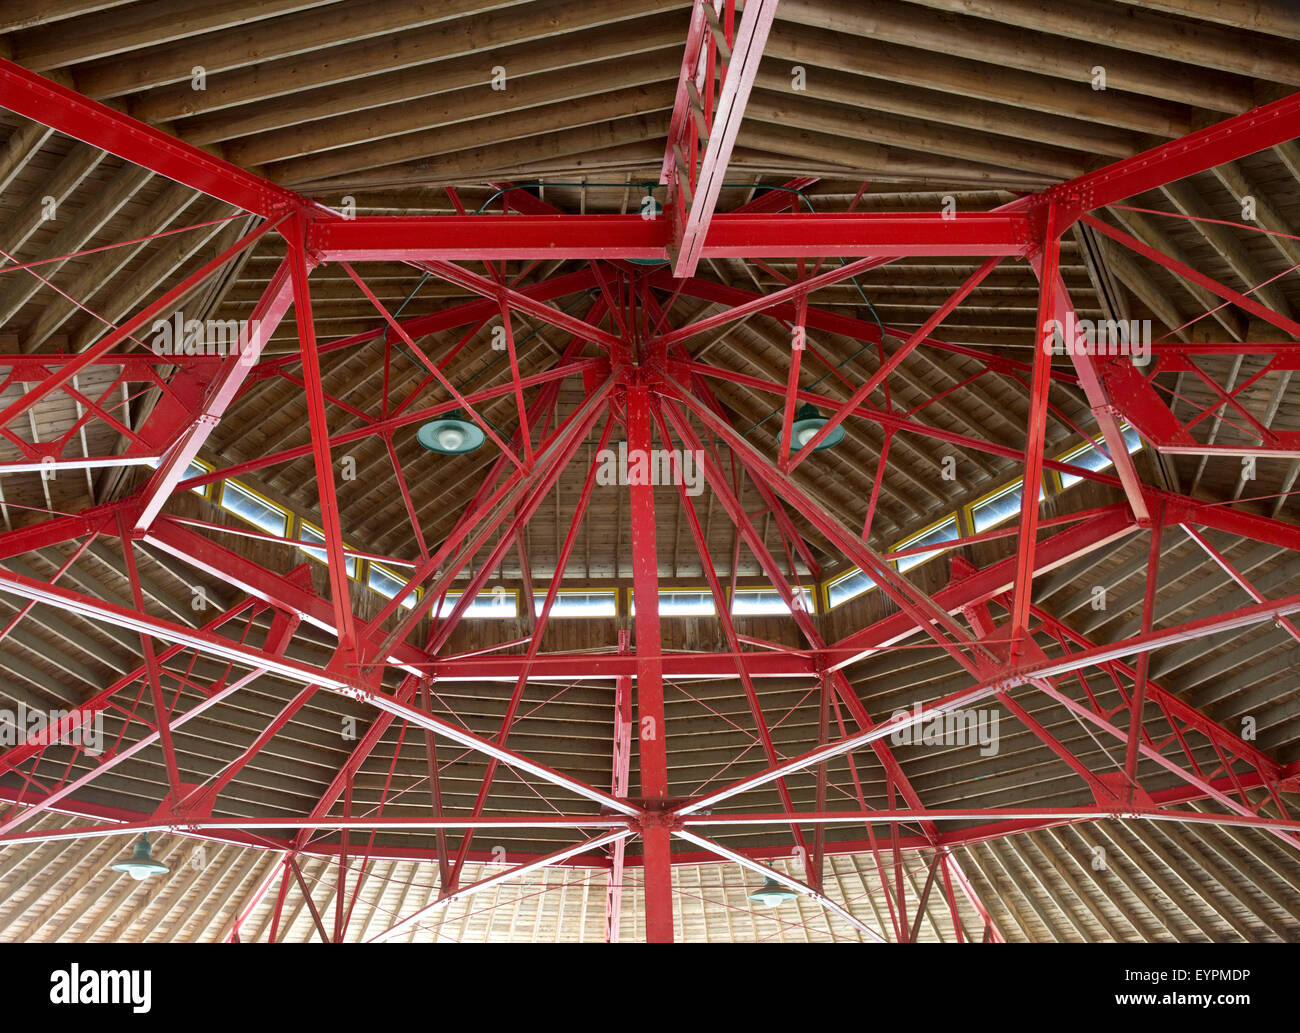 Internal support structure for a picnic area. Stock Photo